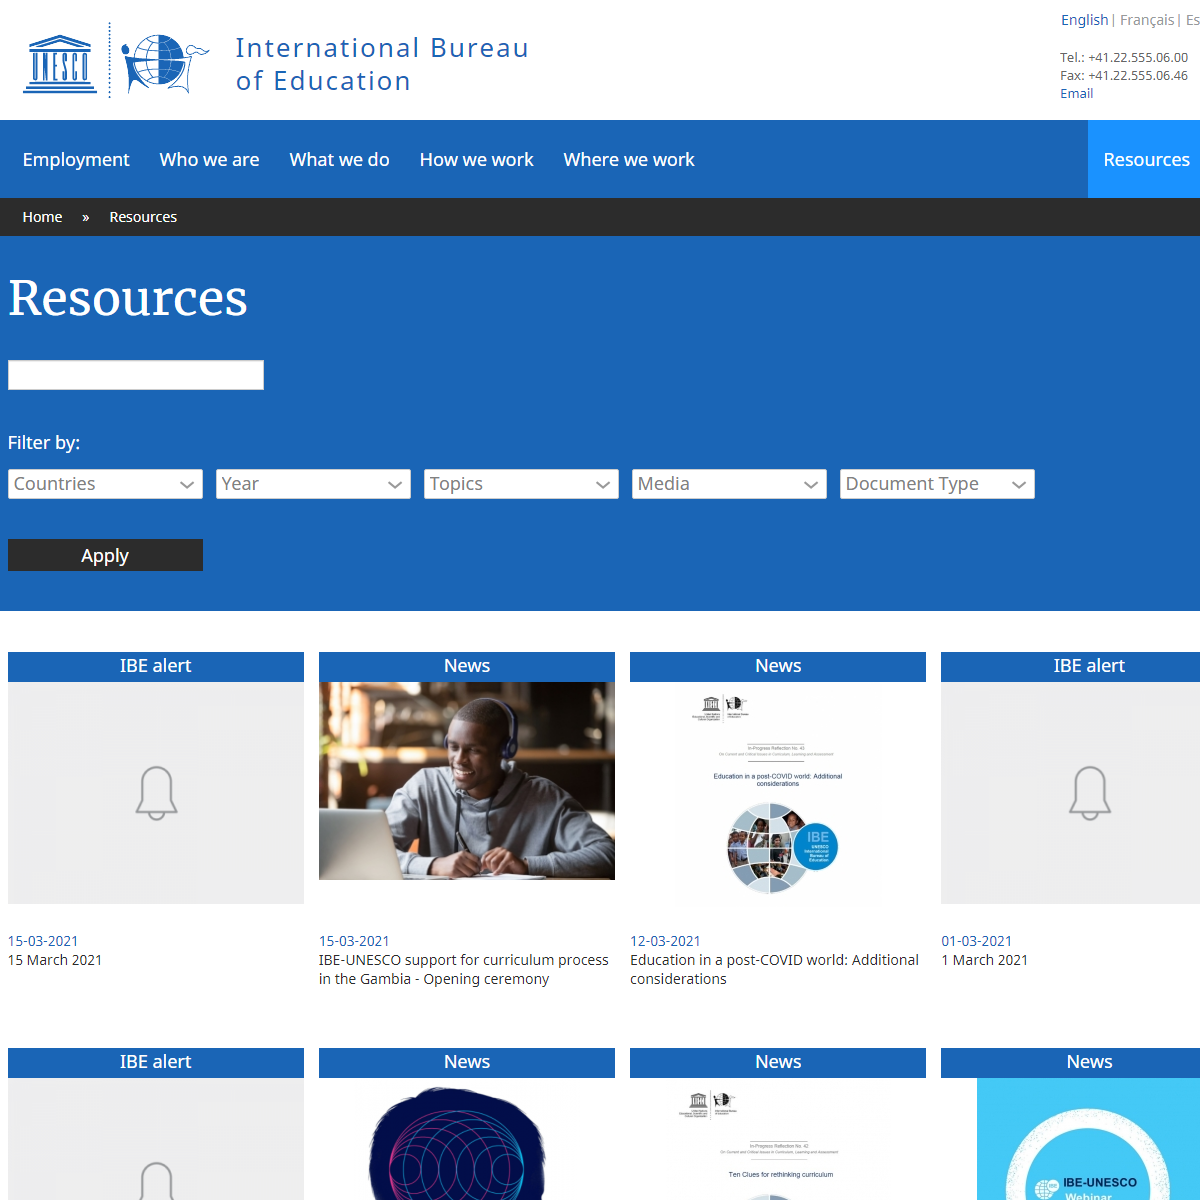 A complete backup of http://www.ibe.unesco.org/en/resources